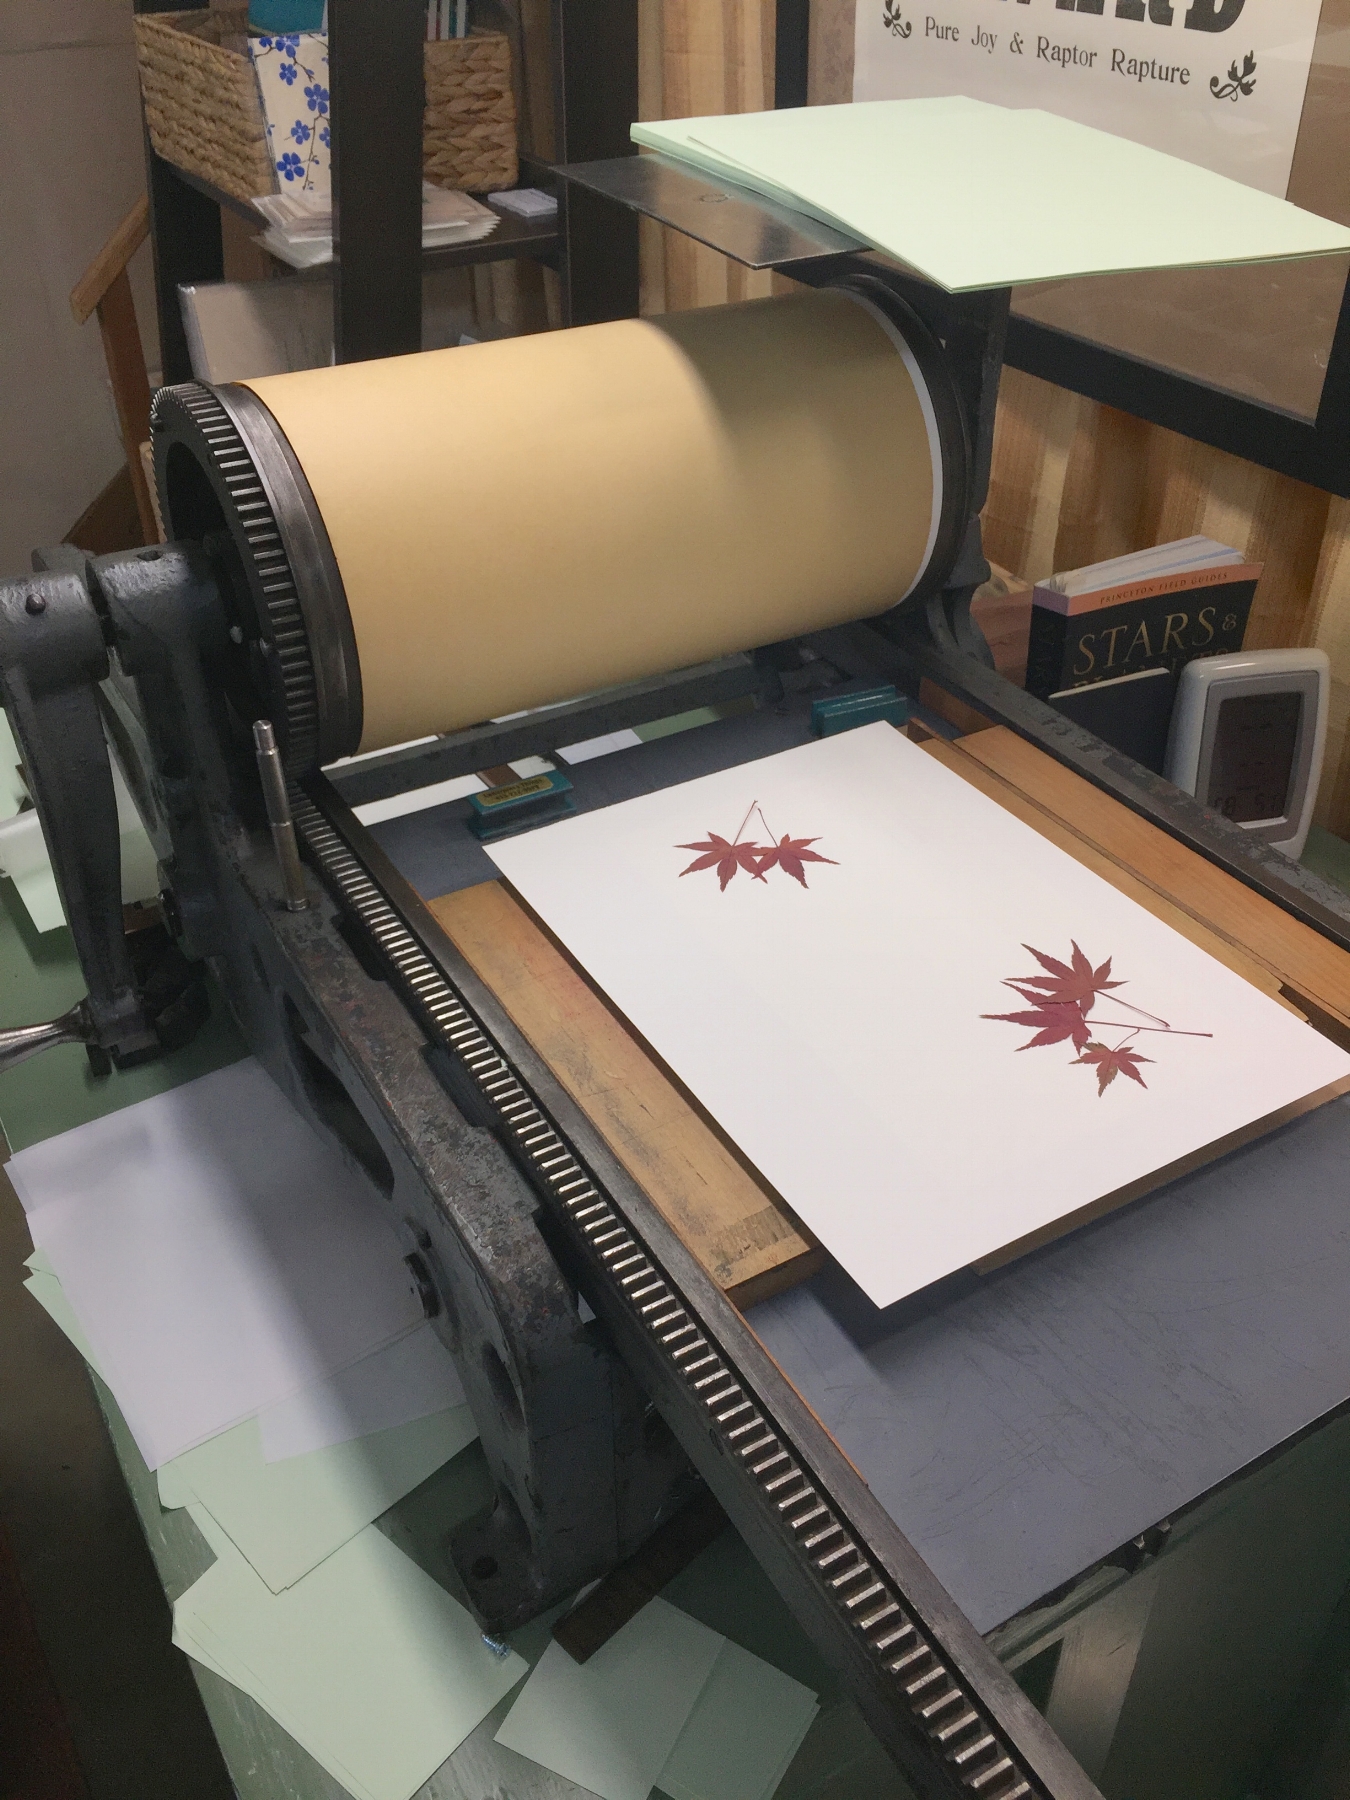  This is my very first printing press, a Poco "0" made in Chicago around 1910 and designed to proof newspaper texts and images. It's a perfect little press for nature printing. When I had the leaves where I wanted on the book page, I placed an over s